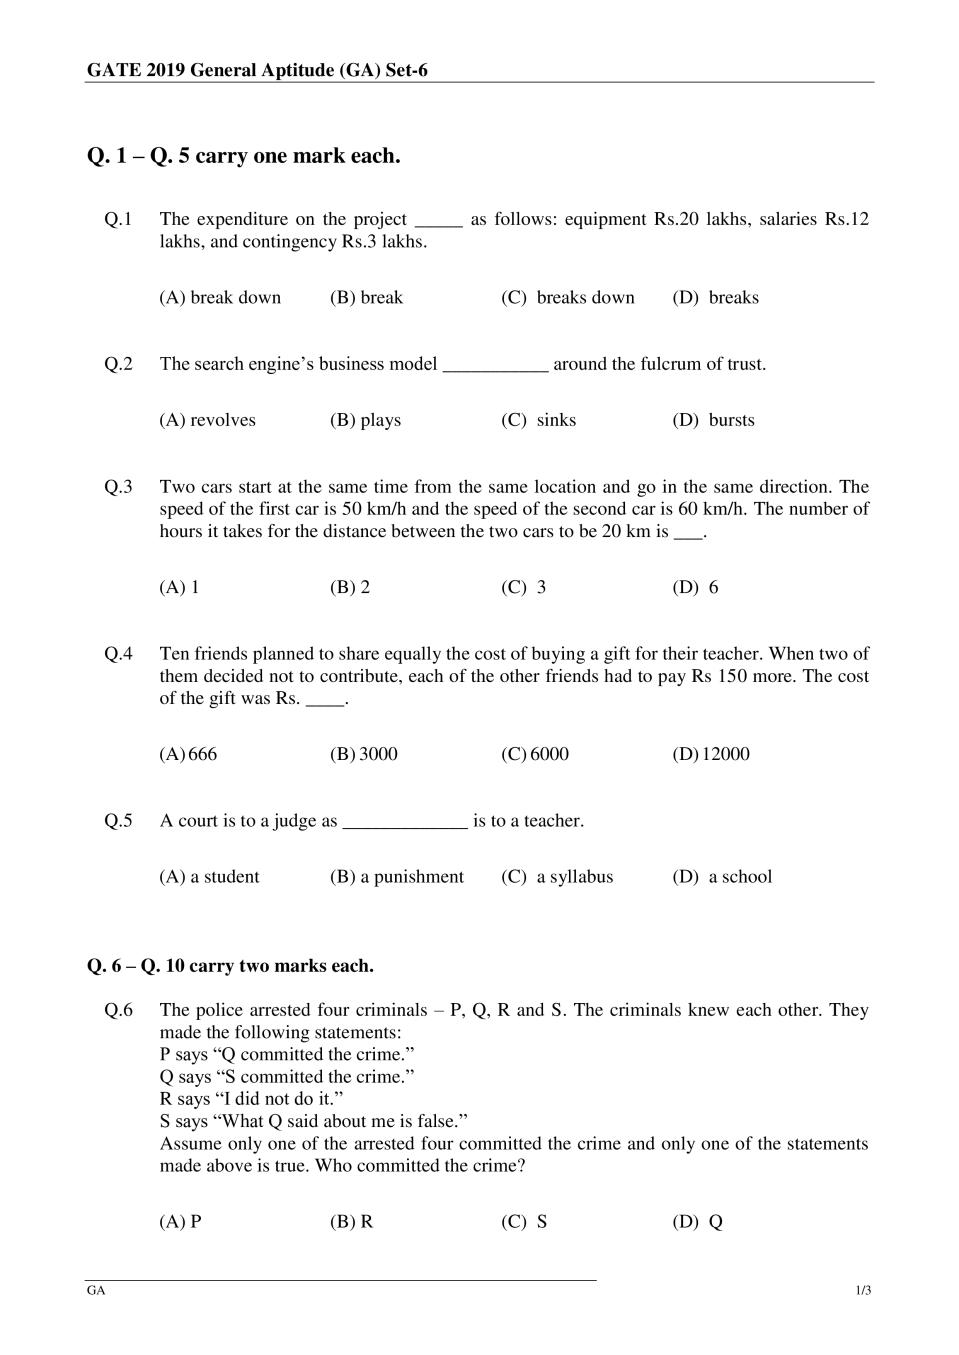 GATE 2019 Chemical Engineering (CE) Question Paper with Answer - Page 1